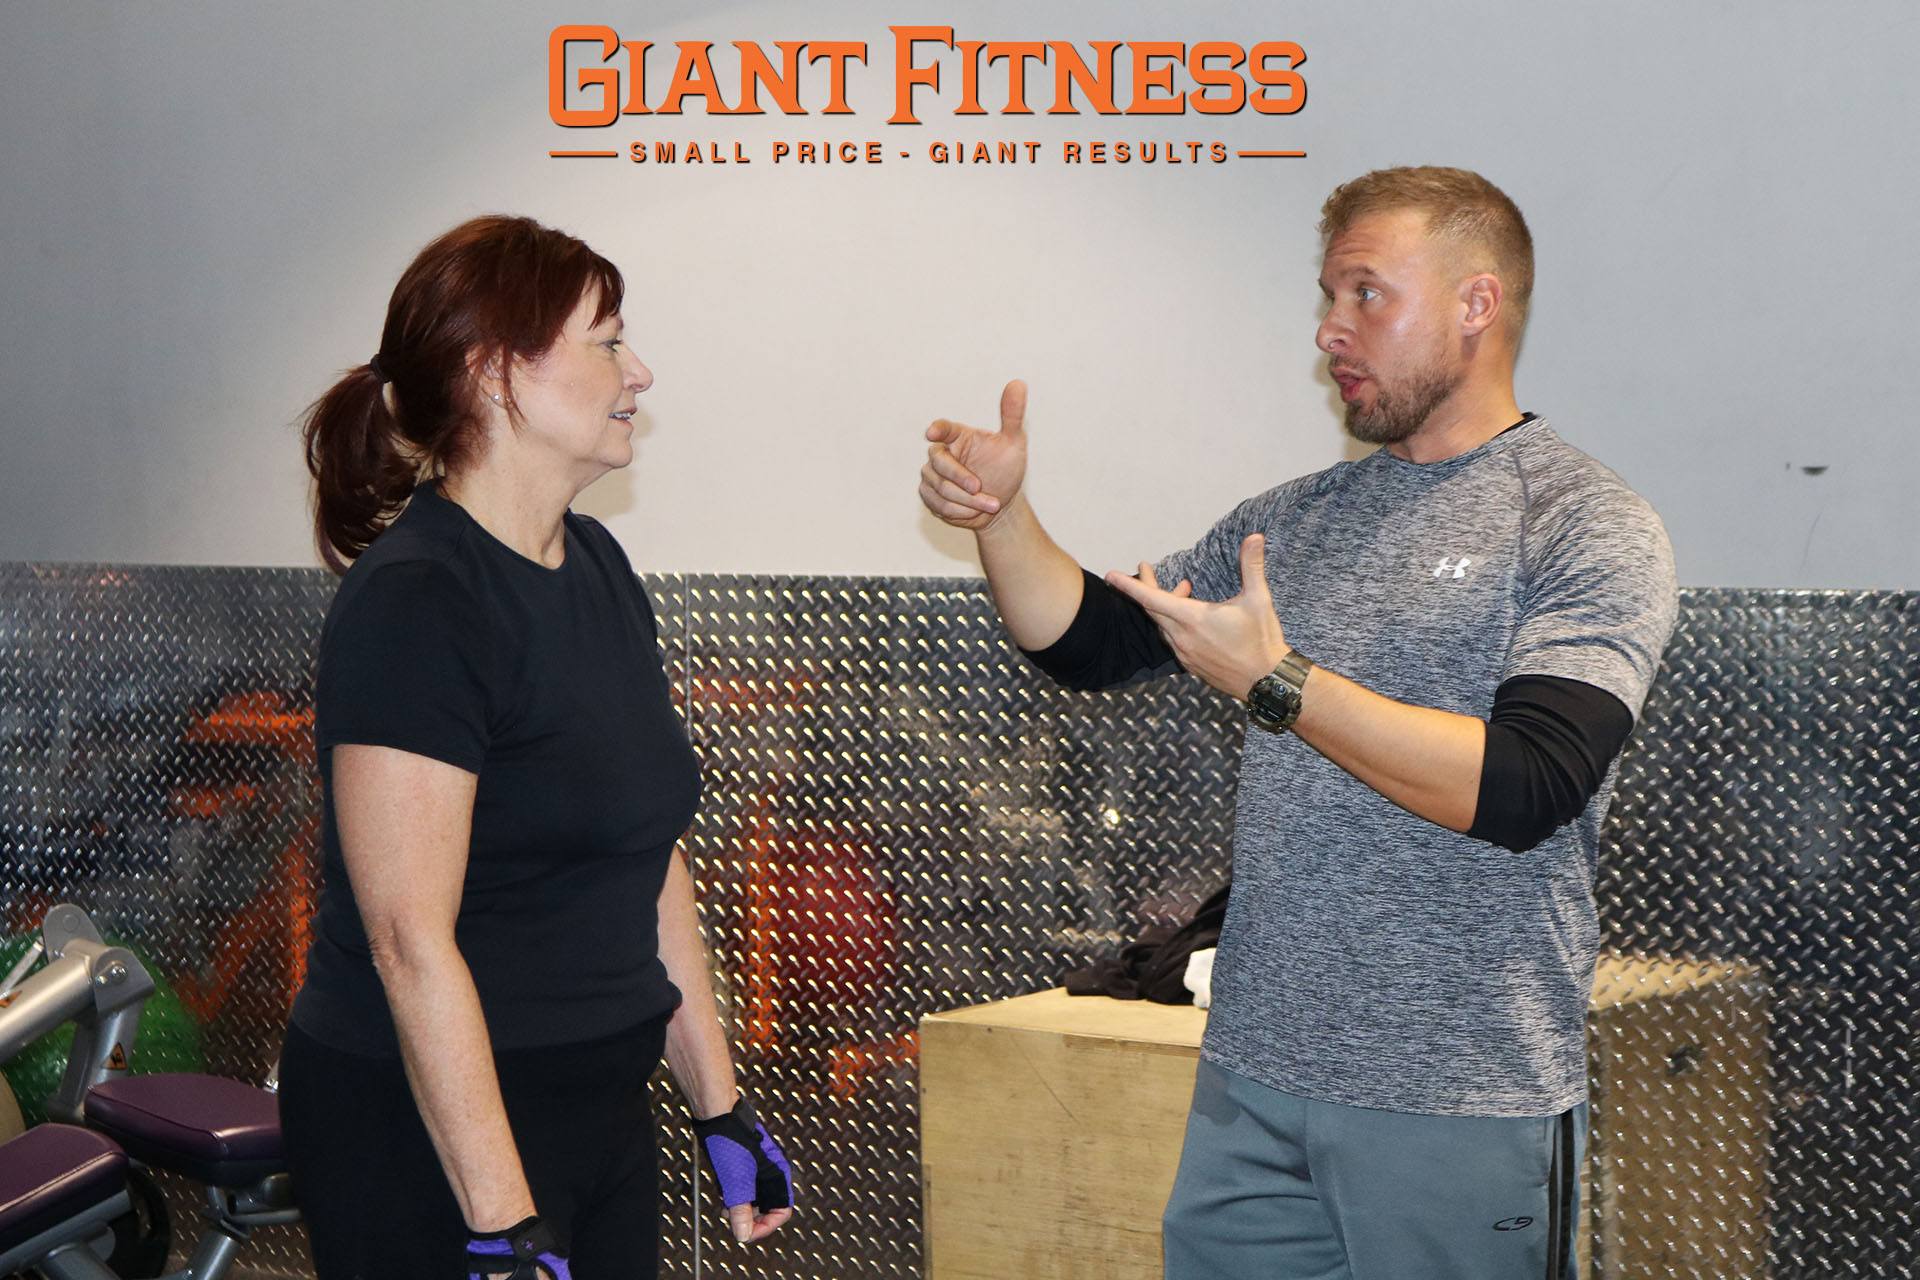 Giant Fitness - Small Price. Giant Results. - Just $19.99 A Month